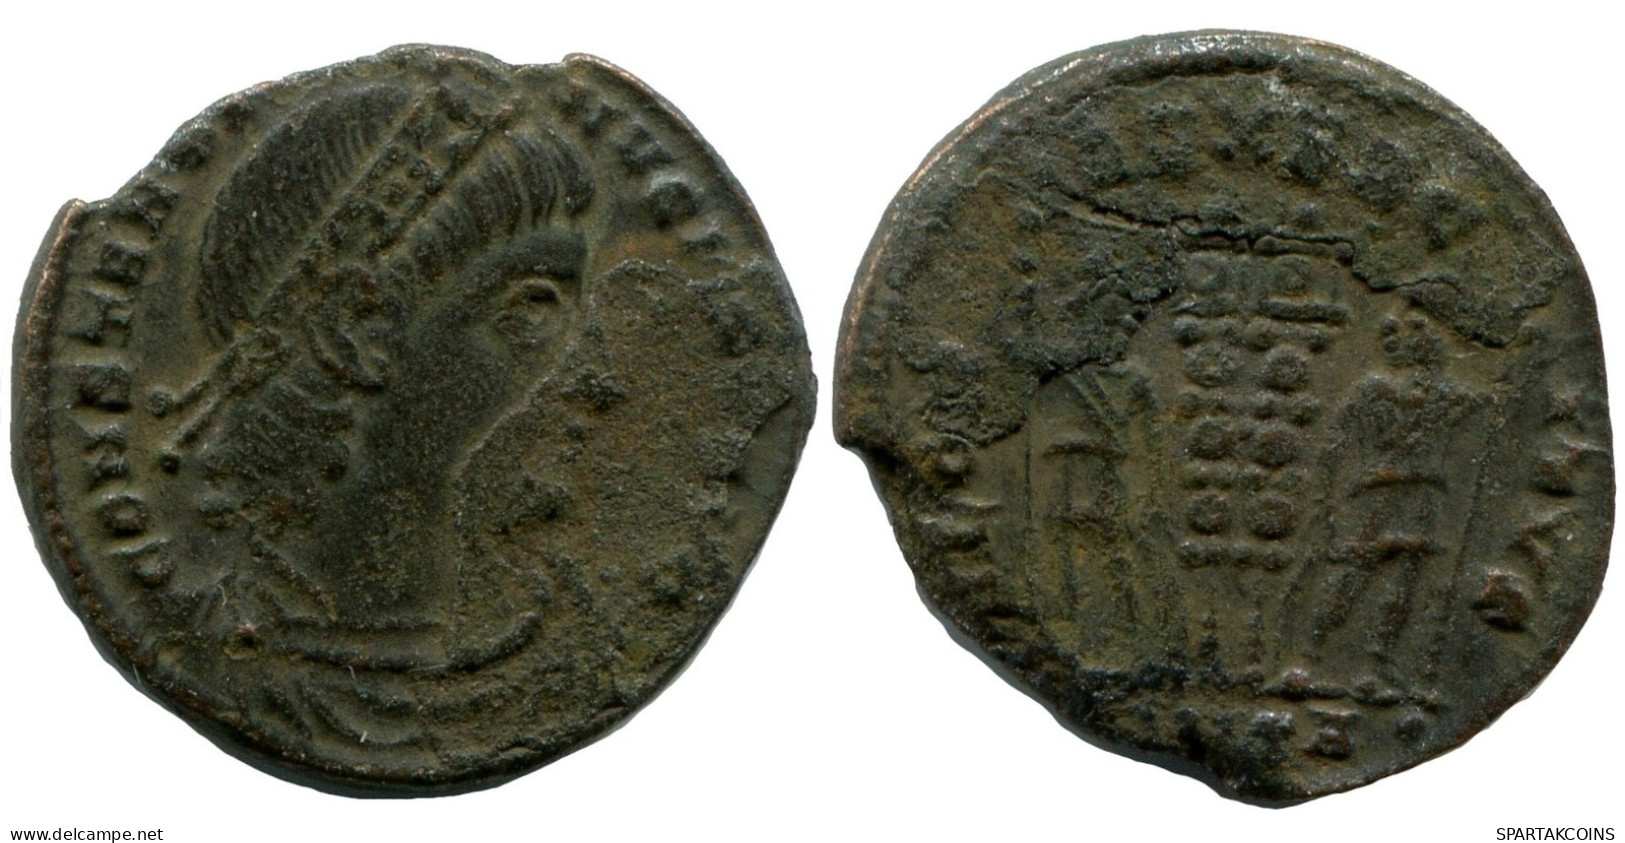 CONSTANTINE I MINTED IN CONSTANTINOPLE FOUND IN IHNASYAH HOARD #ANC10781.14.E.A - The Christian Empire (307 AD To 363 AD)